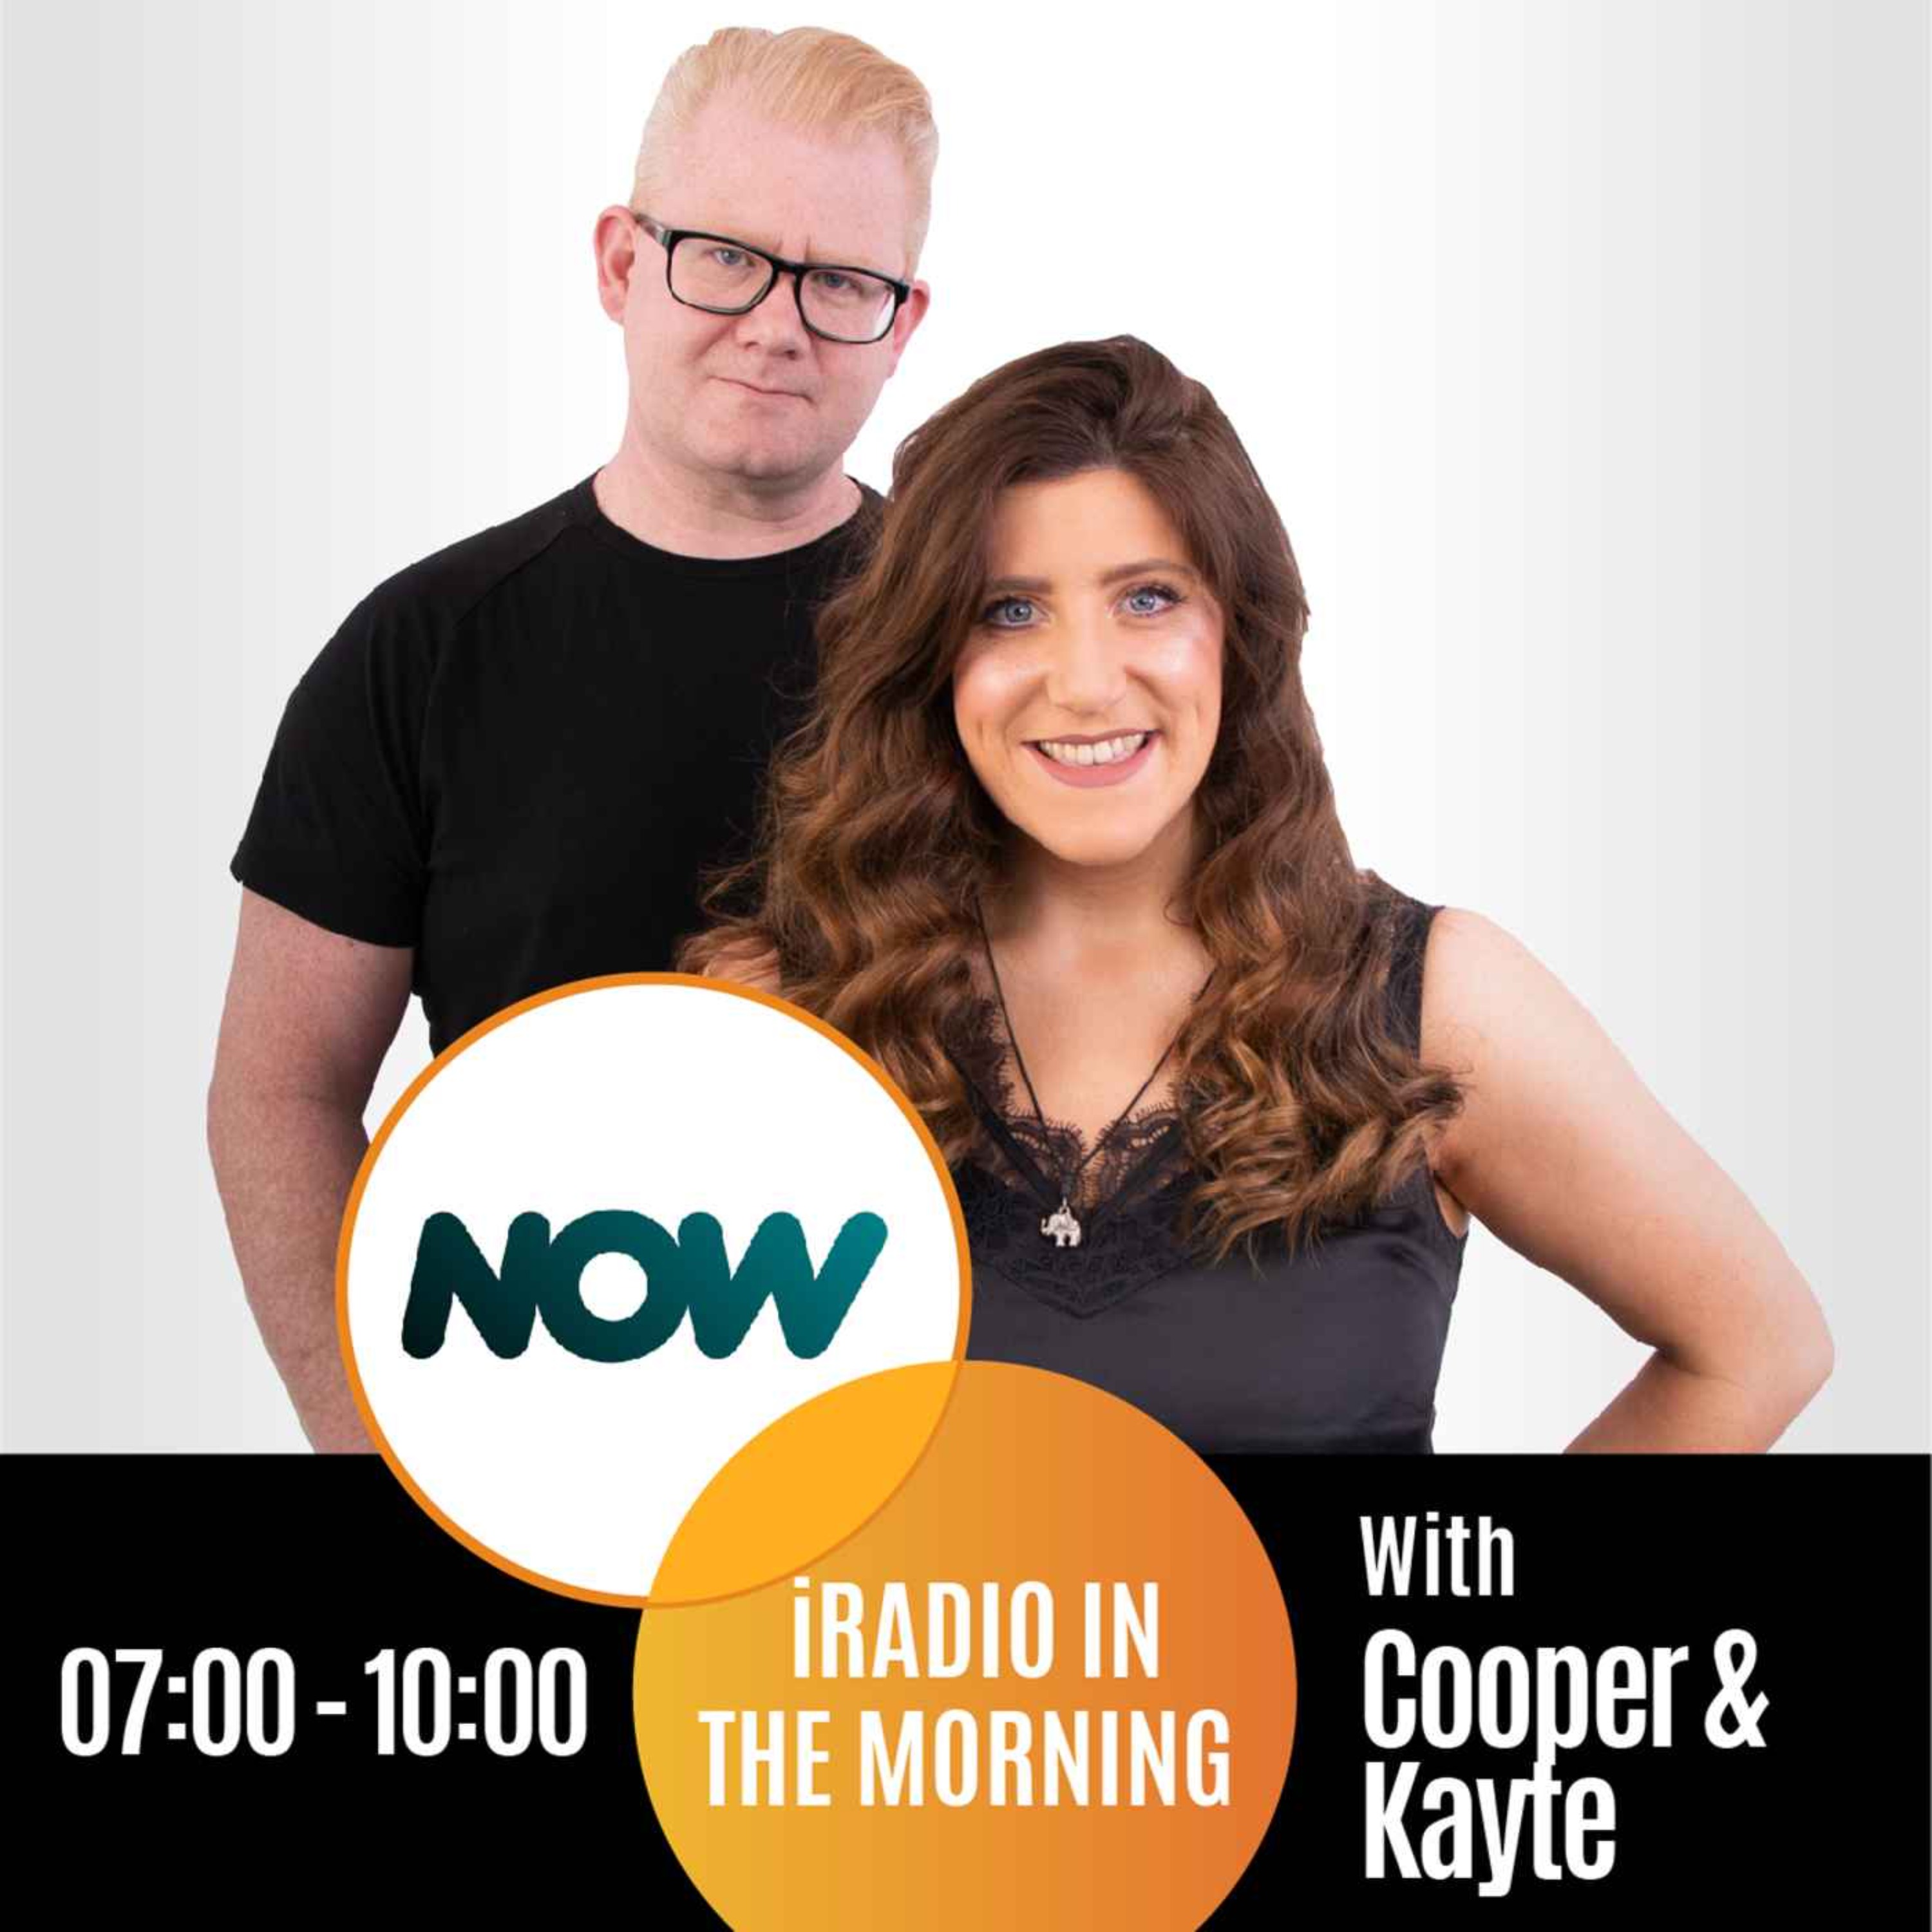 iRadio in the Morning with Cooper & Kayte